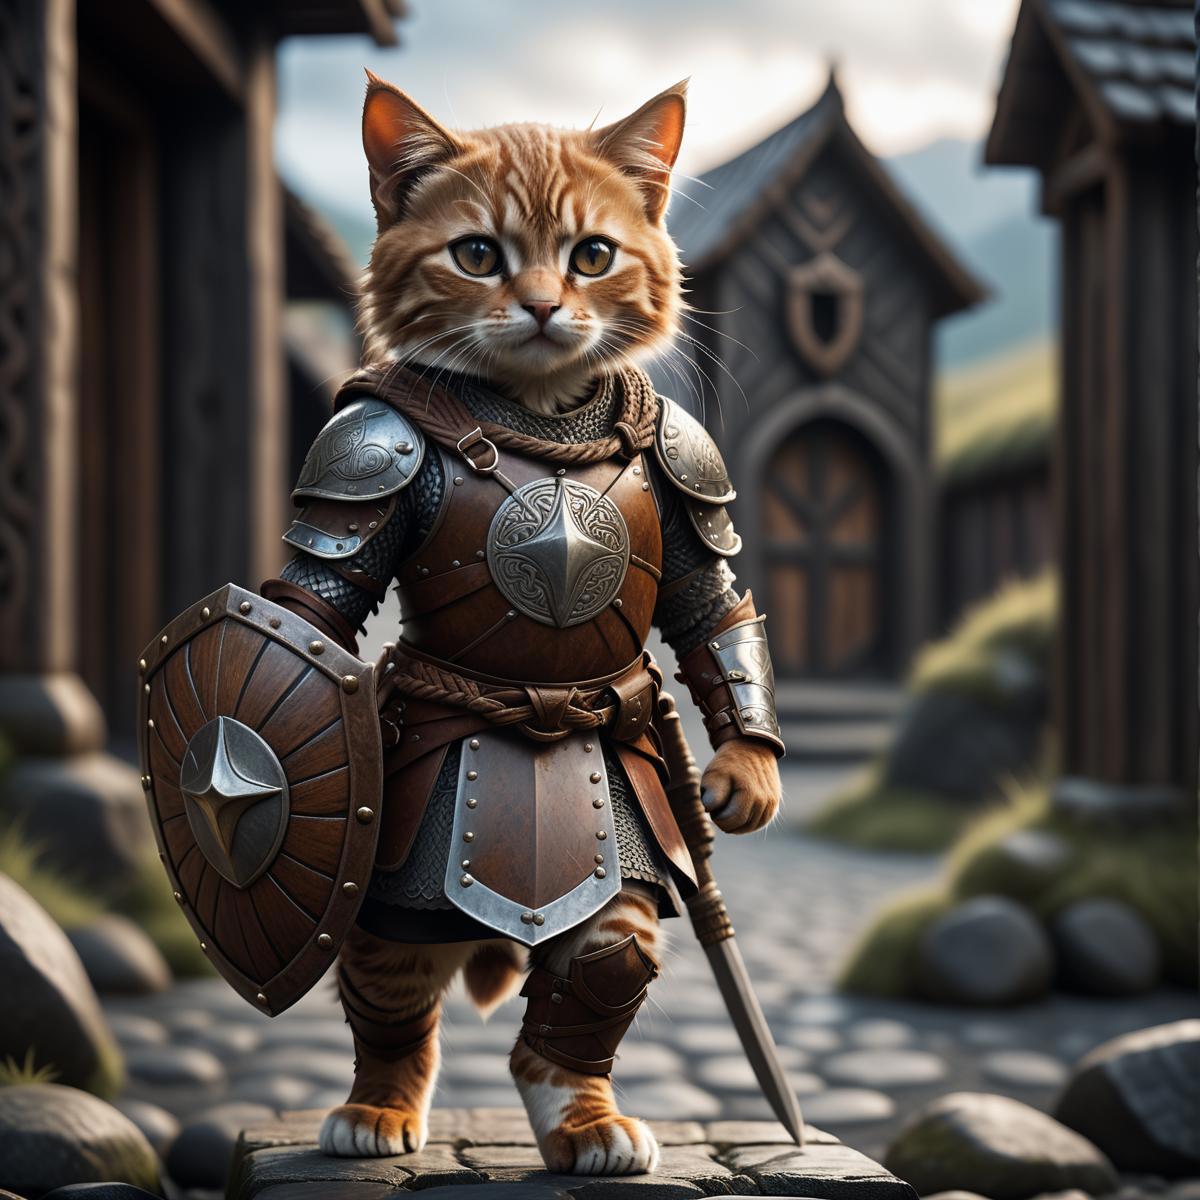 A small cat dressed as a knight, holding a shield and sword.